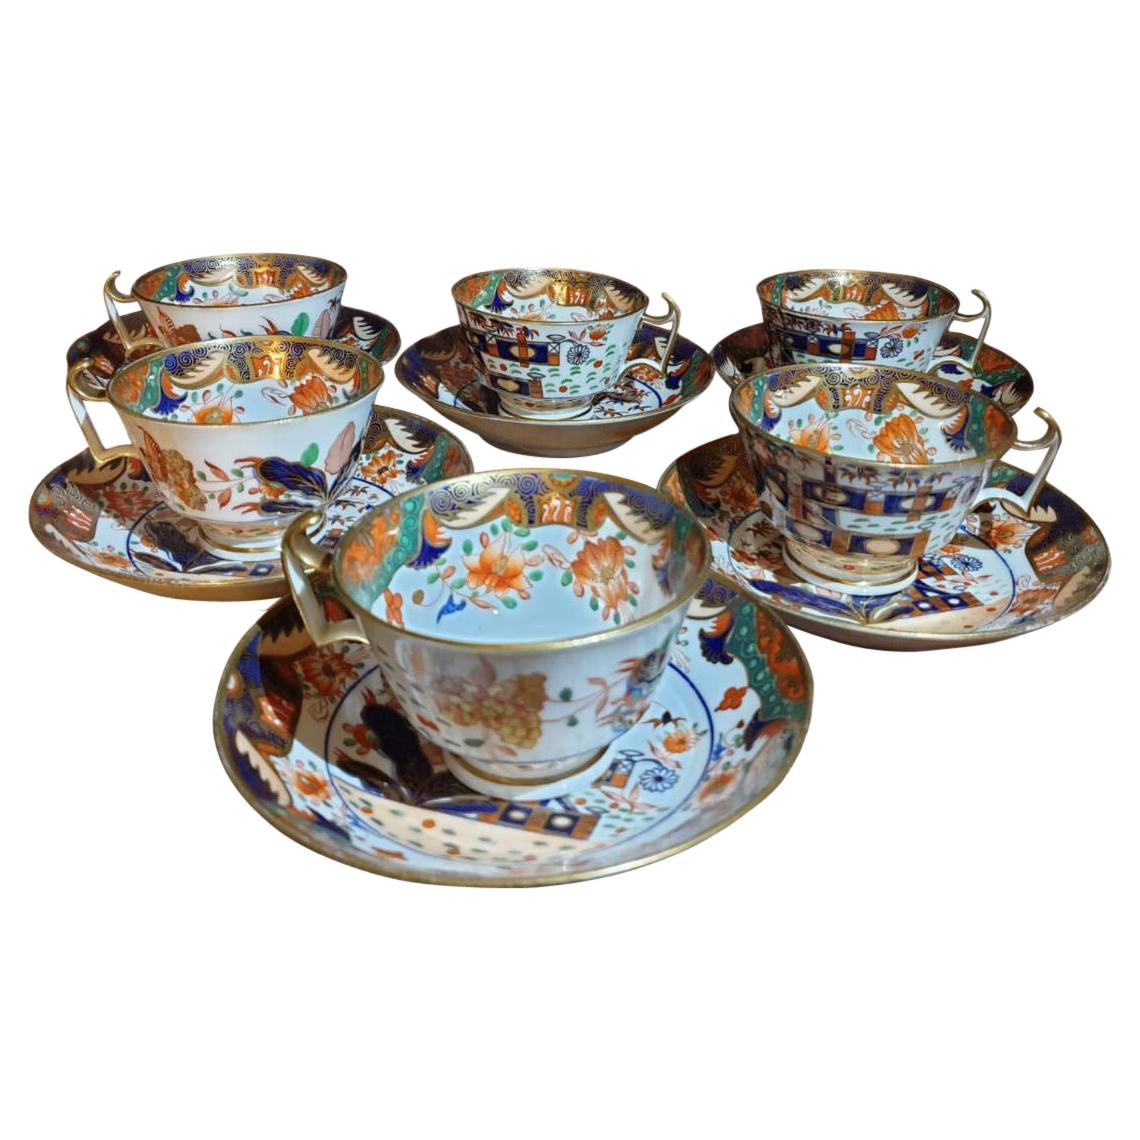 6 Imari Handpainted Spode Cups and Saucers